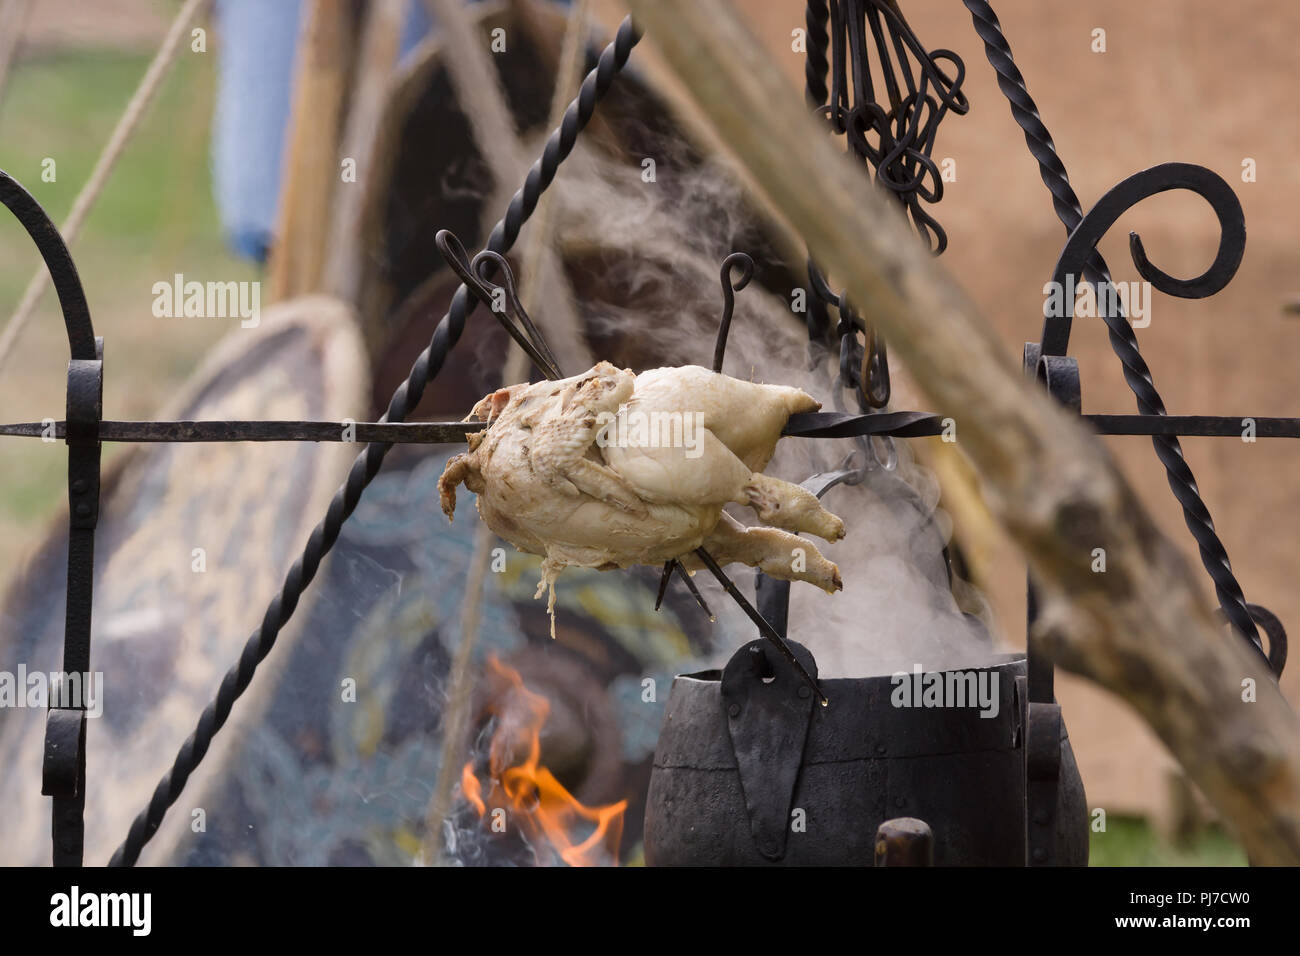 A medieval roasting spit with cauldron or cooking pot suspended on a hanger over an open fire Stock Photo